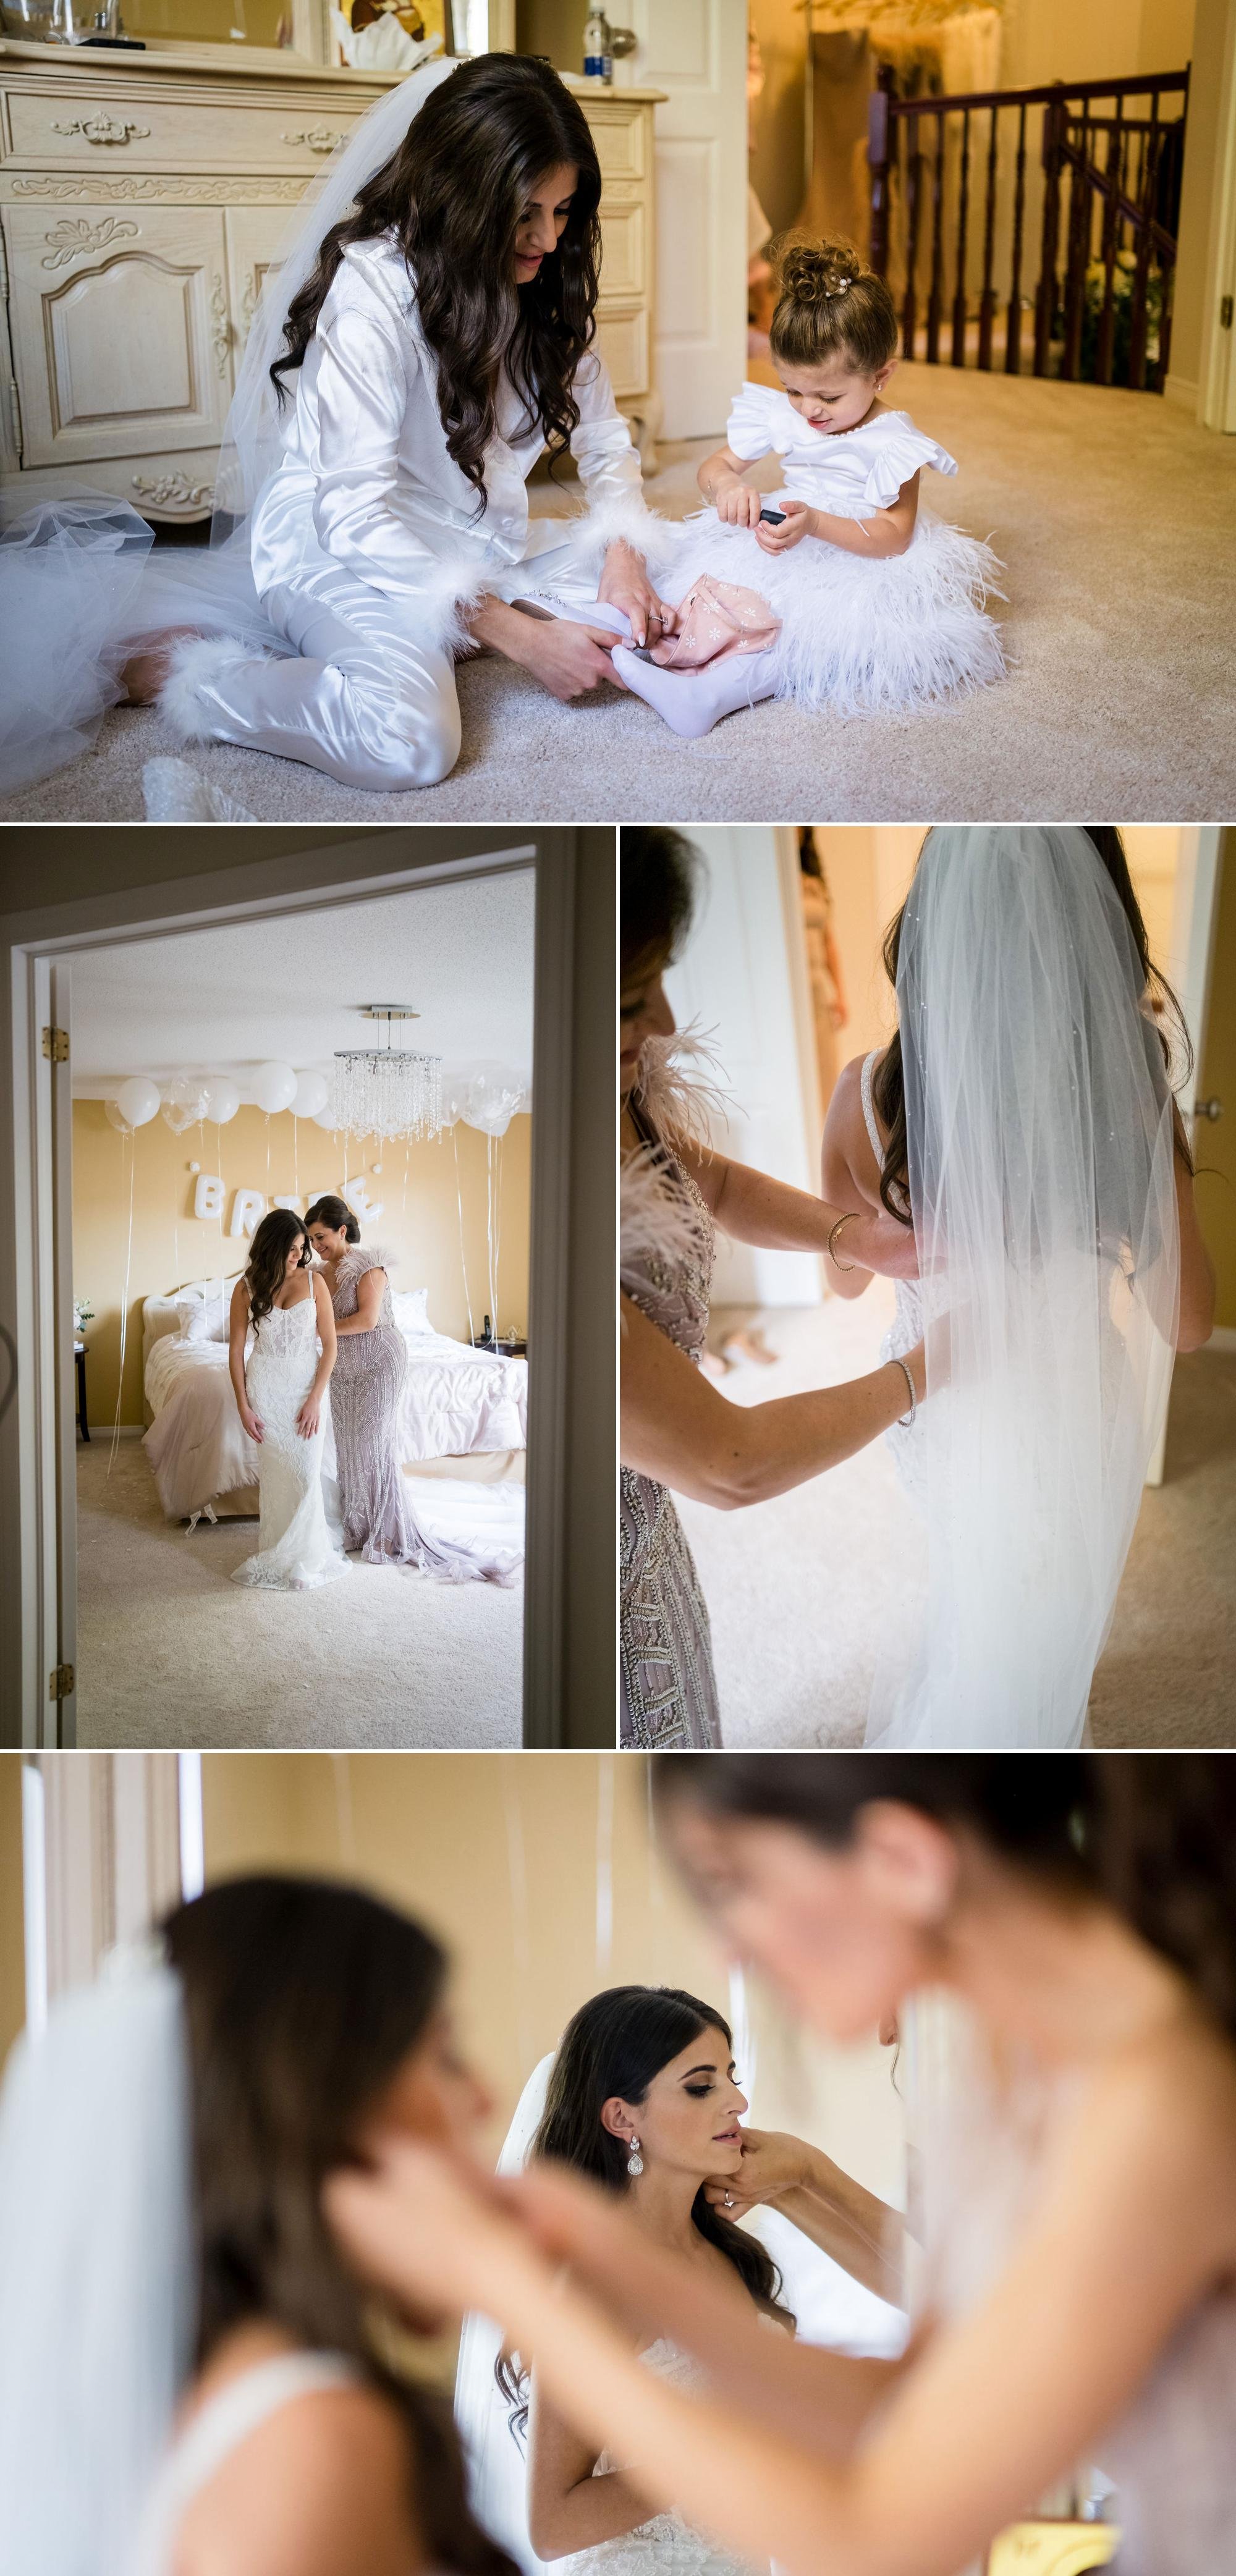 photos of a bride getting ready for her wedding